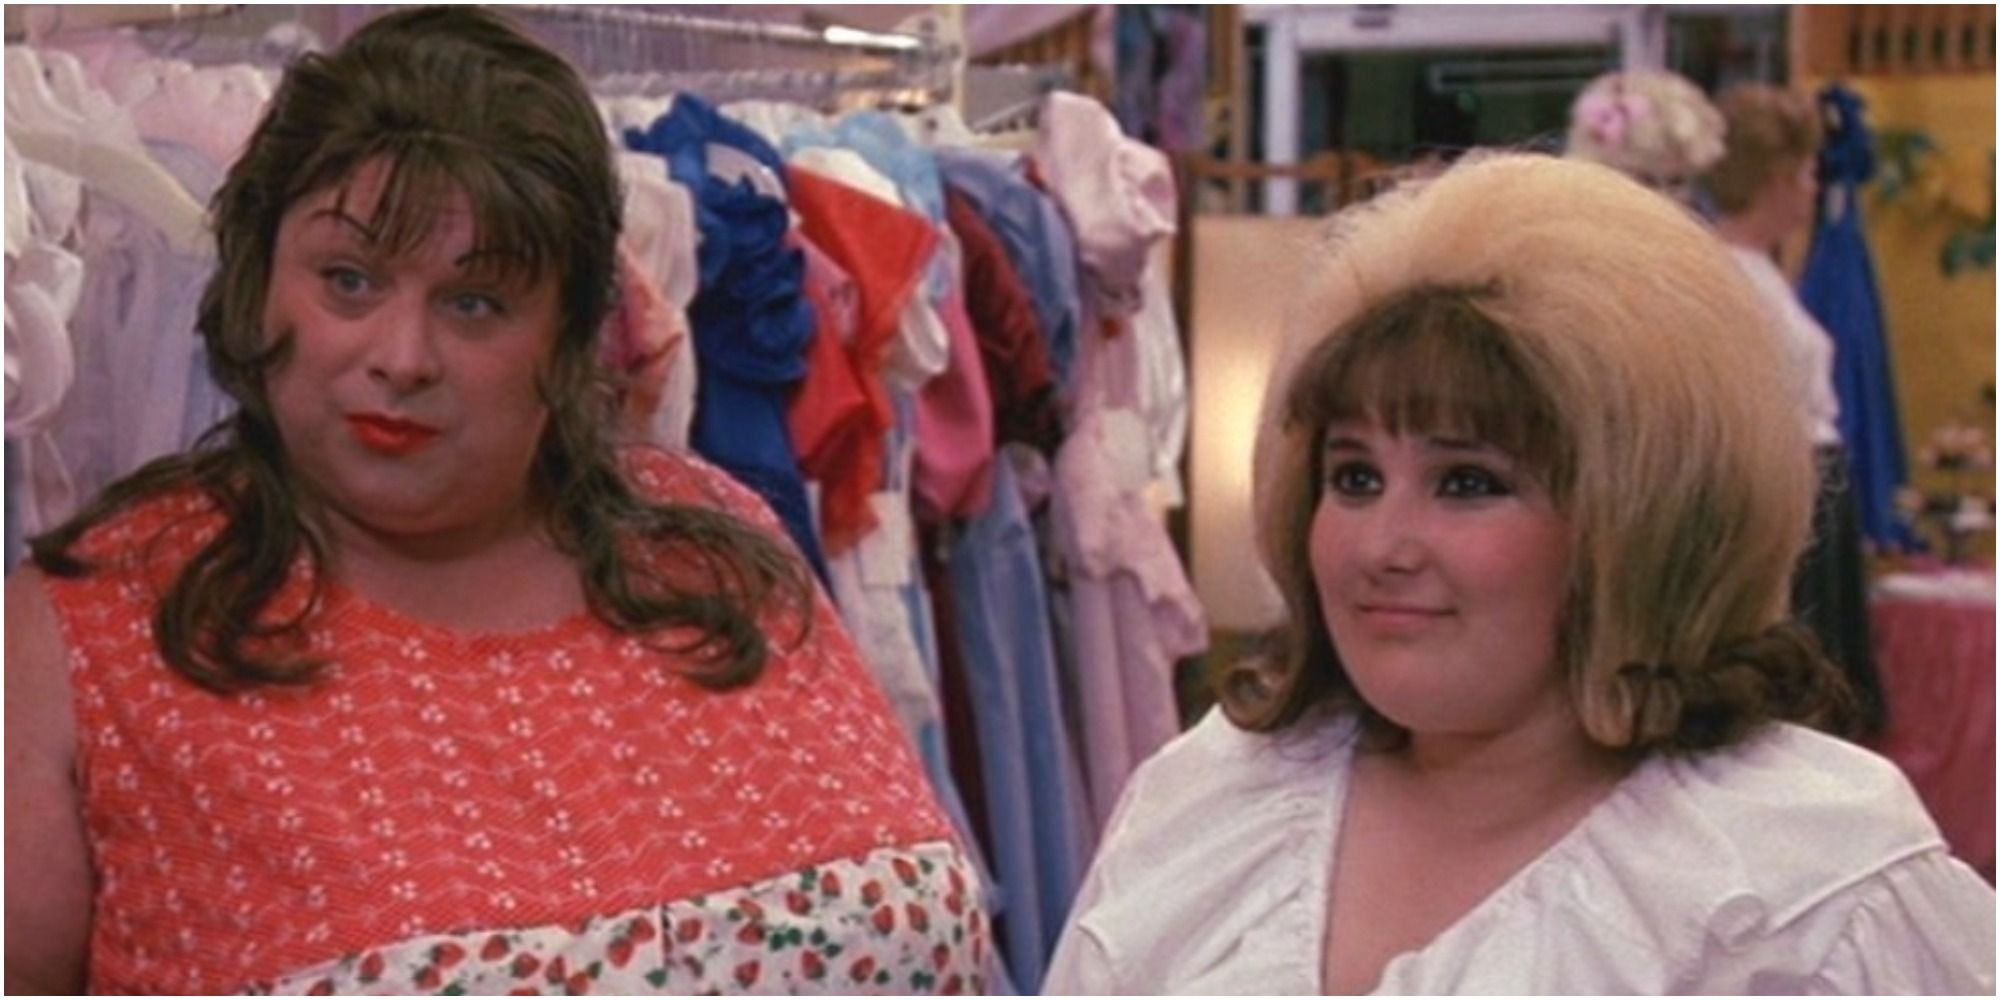 A screenshot of Edna and Tracy Turnblad from Hairspray (1988)